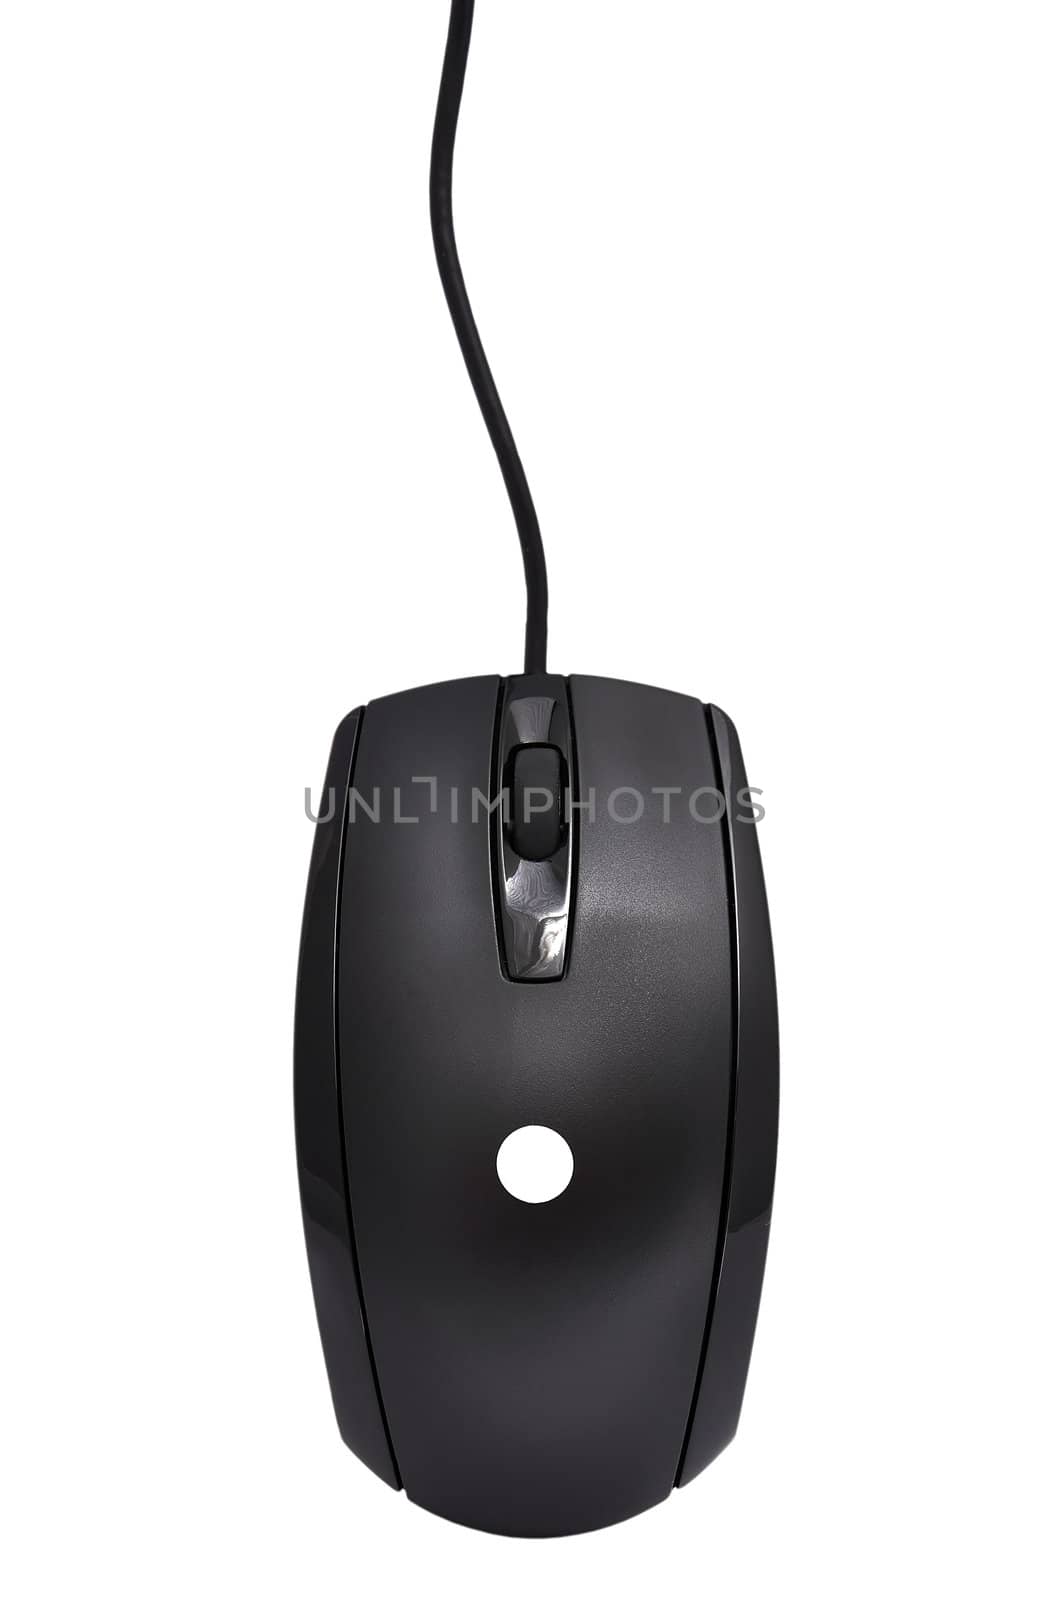 Computer mouse by vetkit